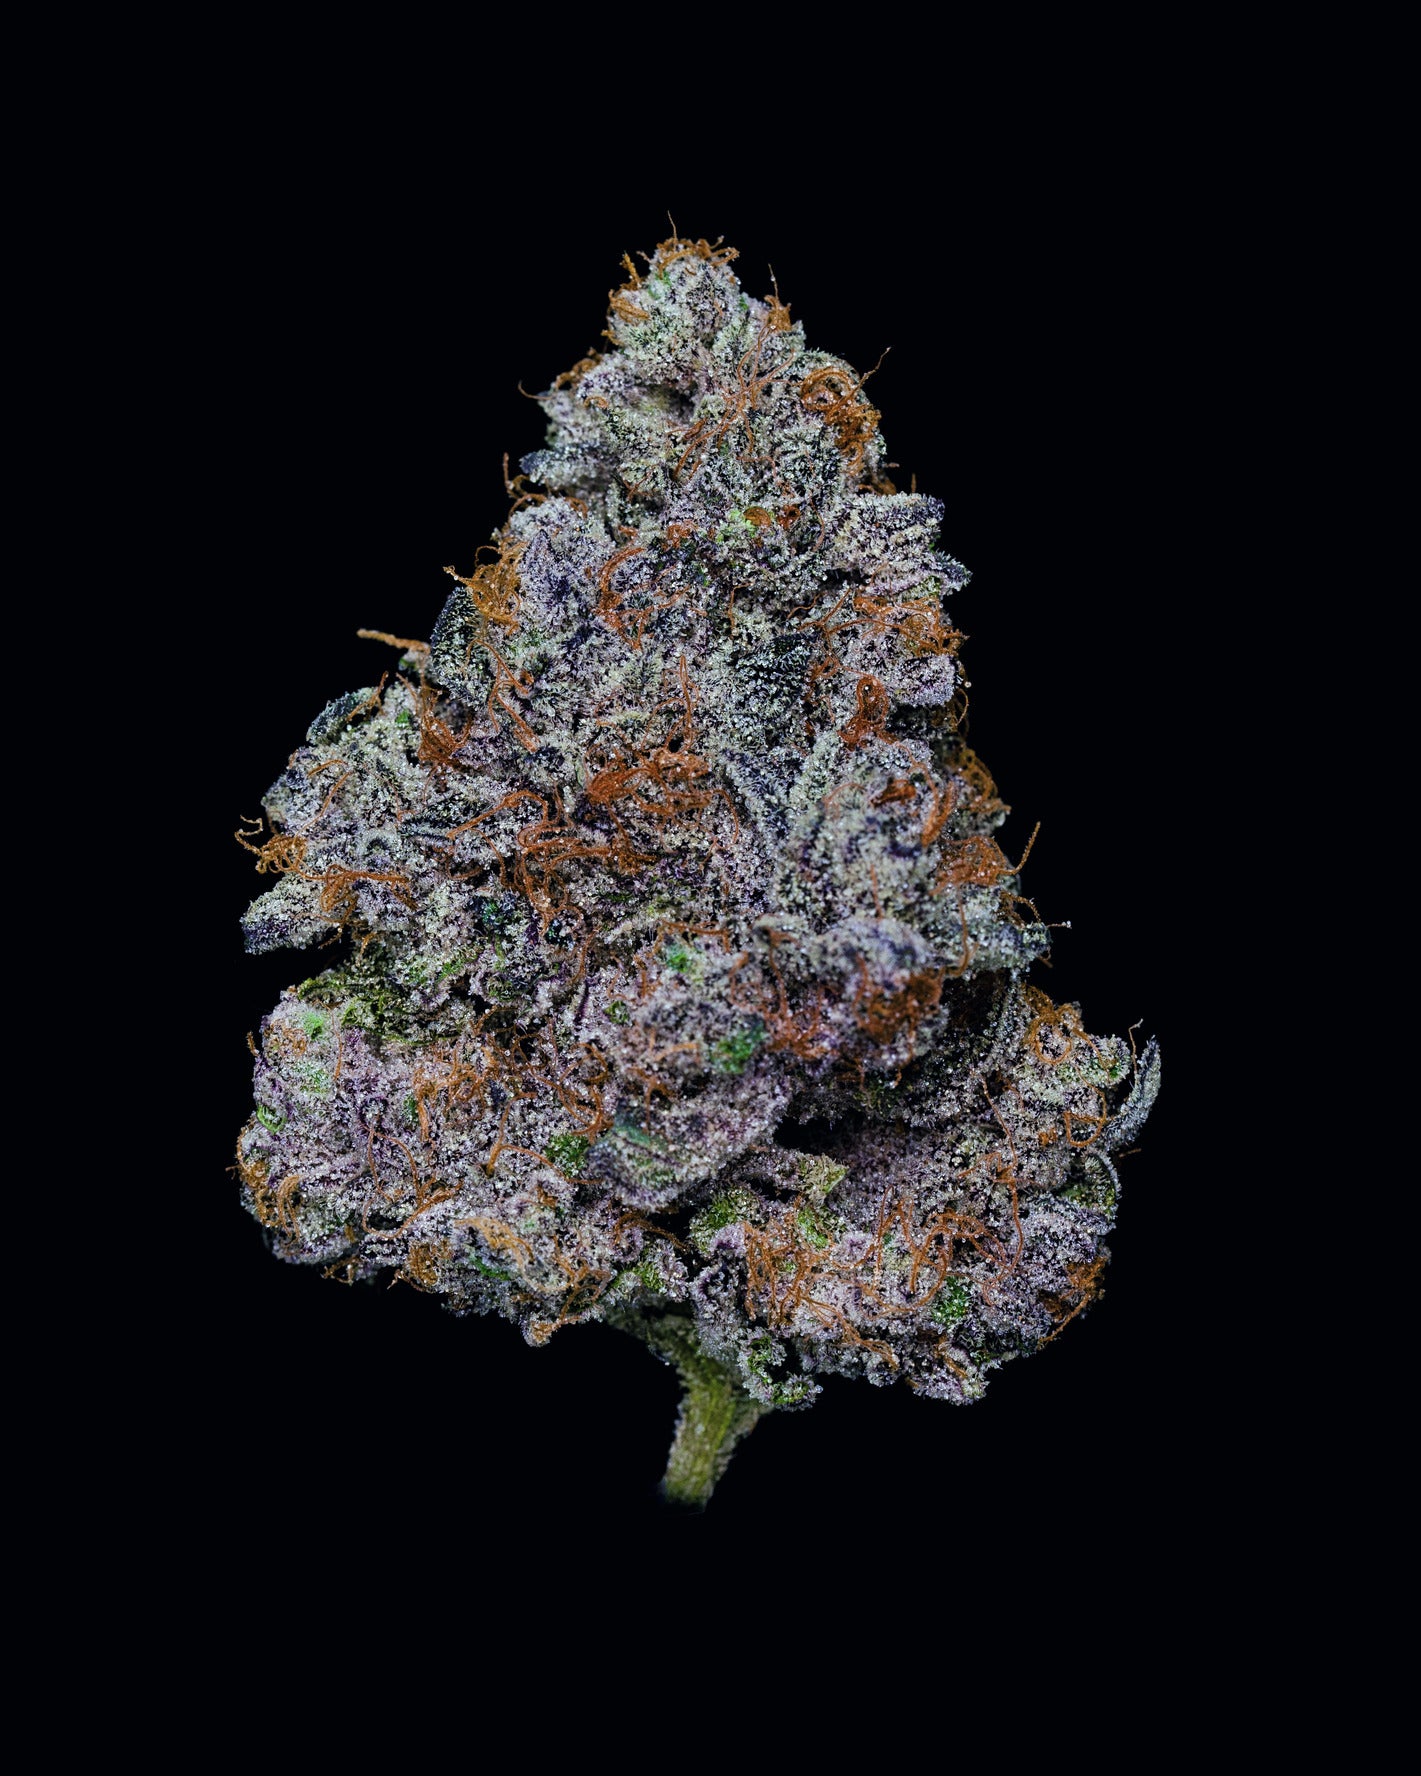 A small nug of cannabis flower from the Vanilla Runtz weed strain sits in front of a black background.